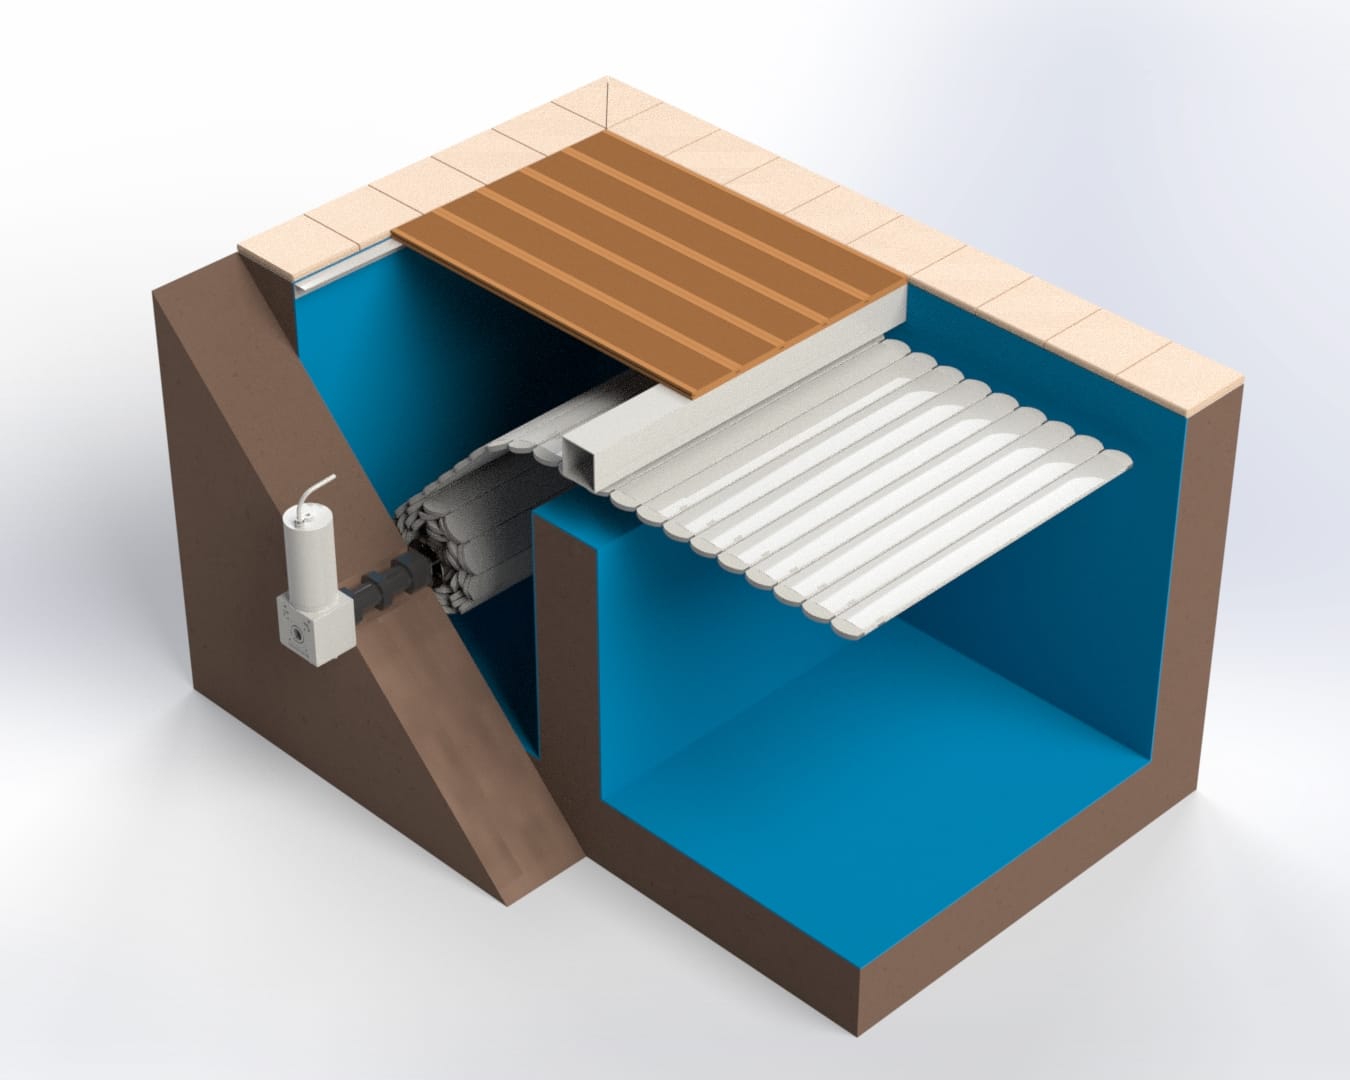 Automatic slatted pool covers